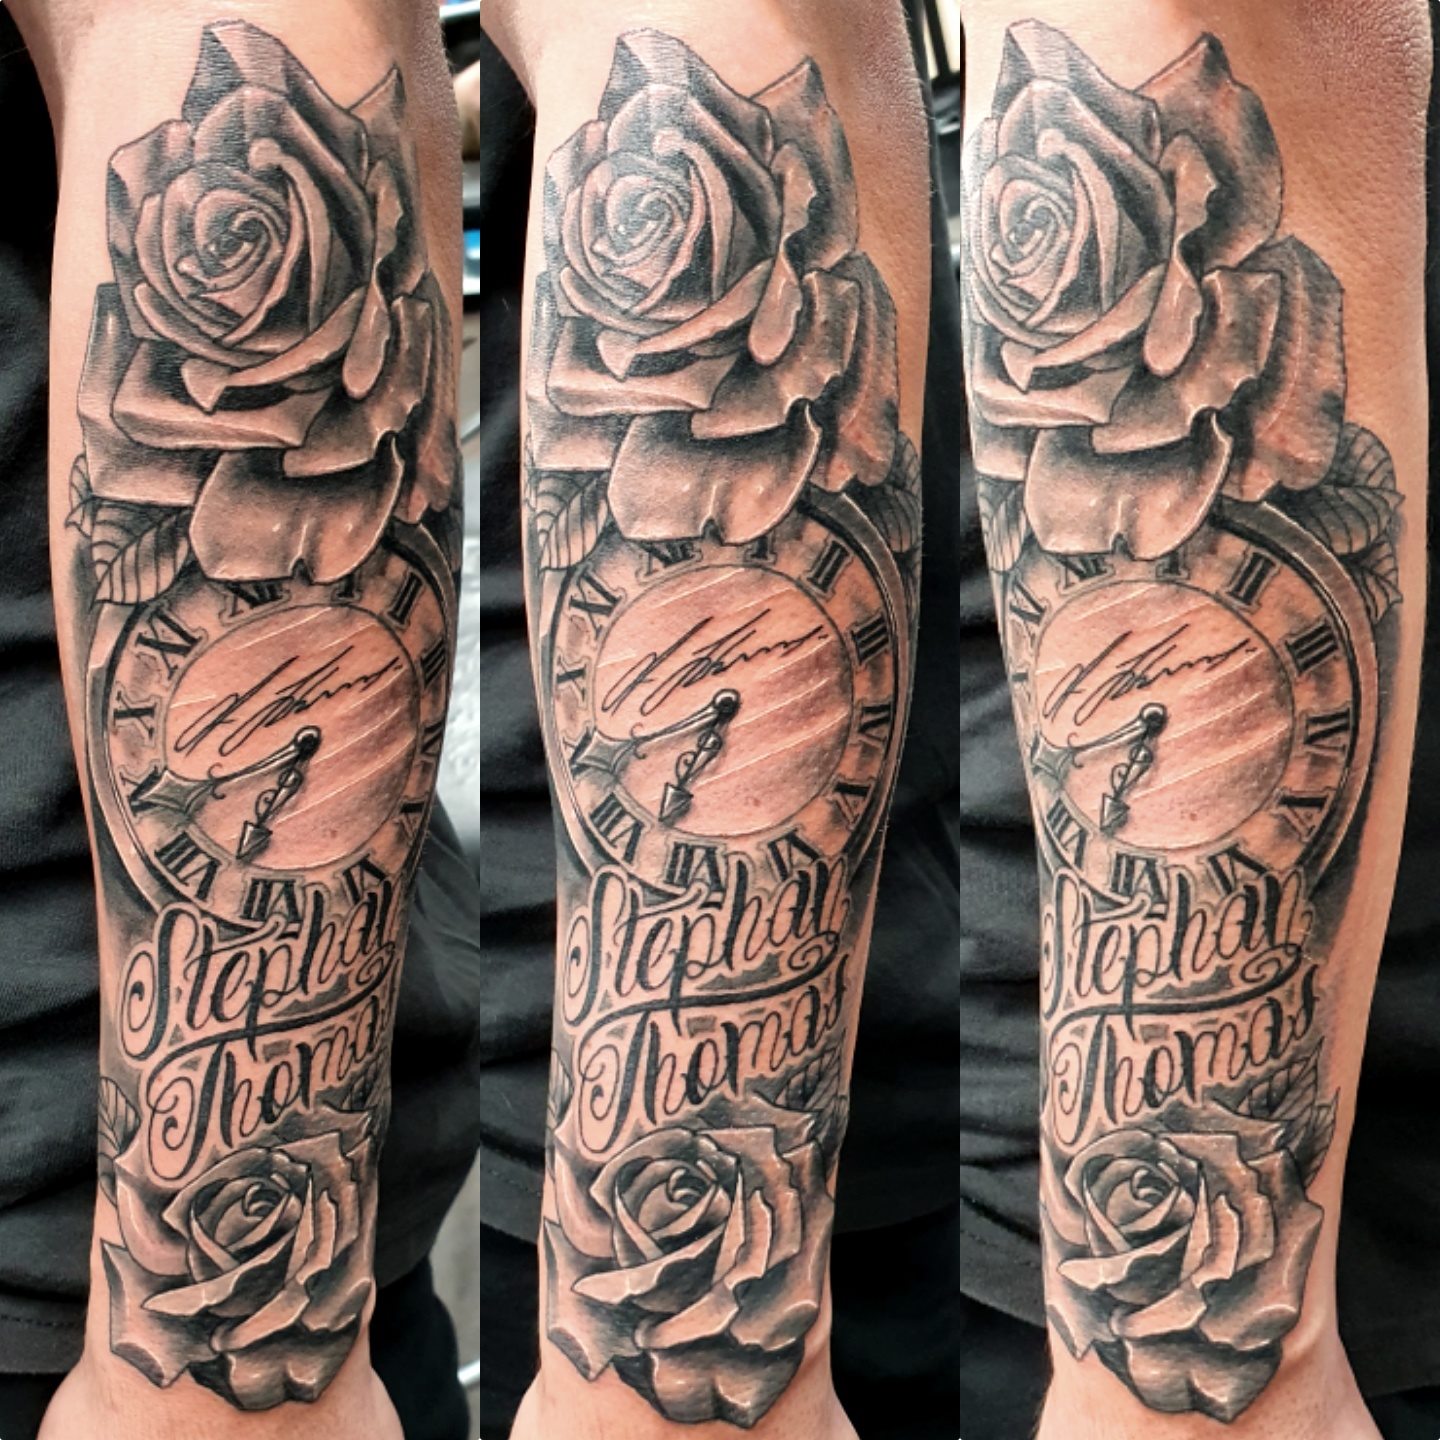 Grey Rose Clock and Name Tattoo on Arm by Levi Bell